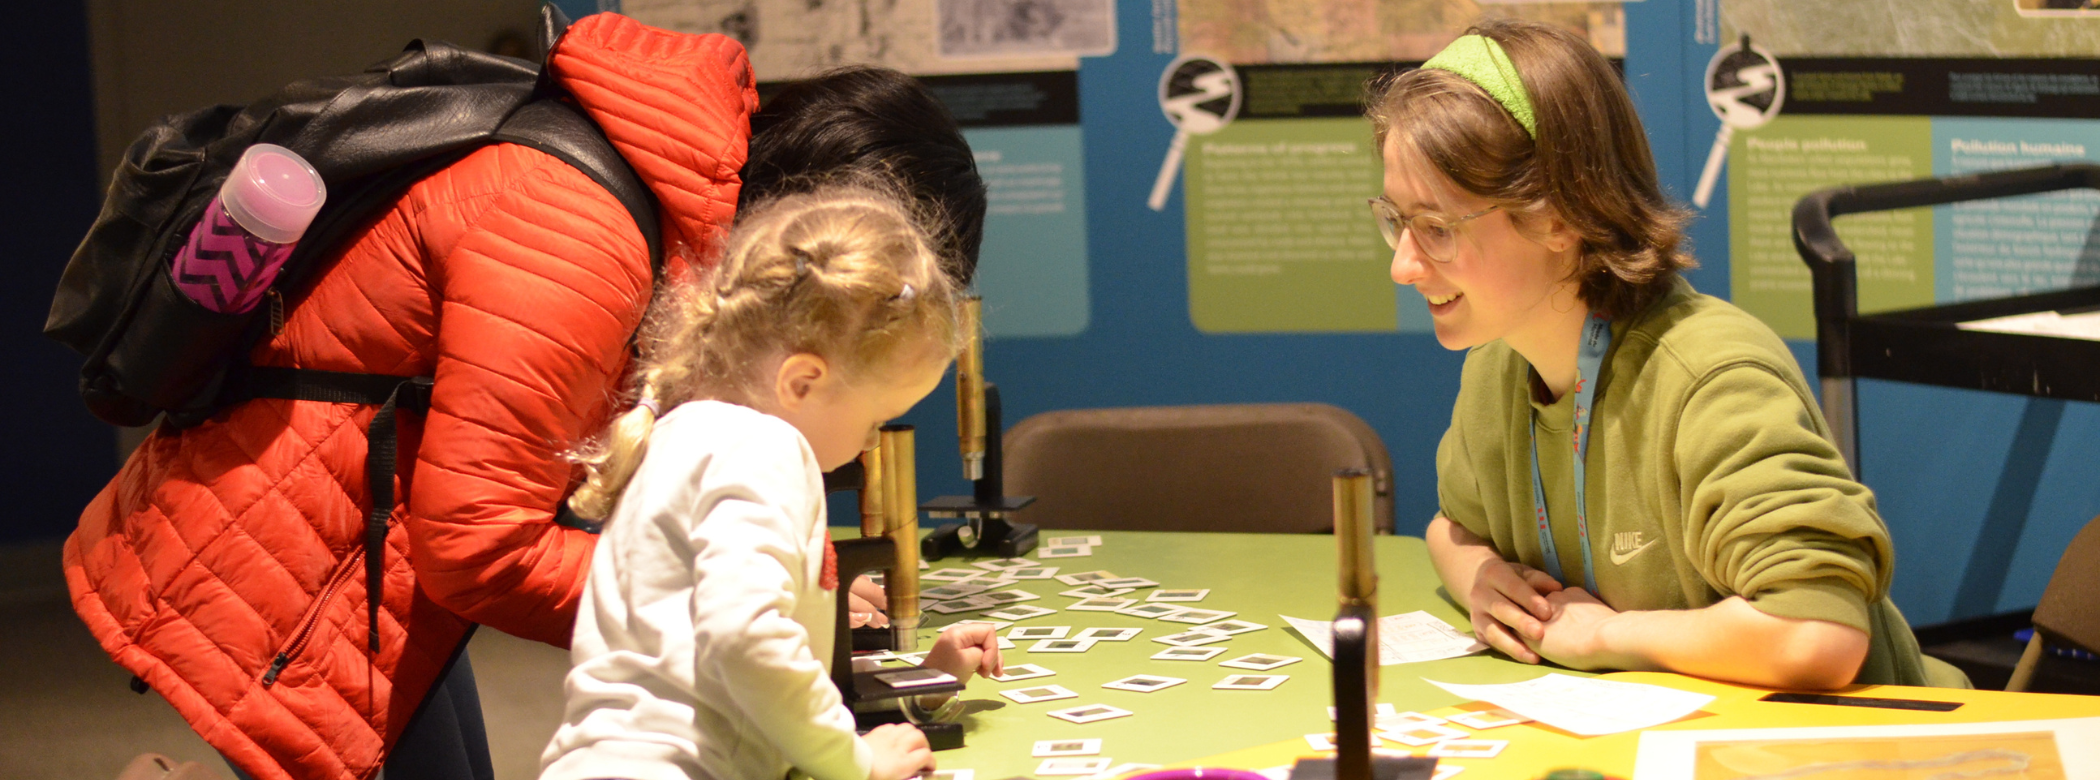 A Museum staff member seated at a table supervising a young visitor who is looking into a microscope.